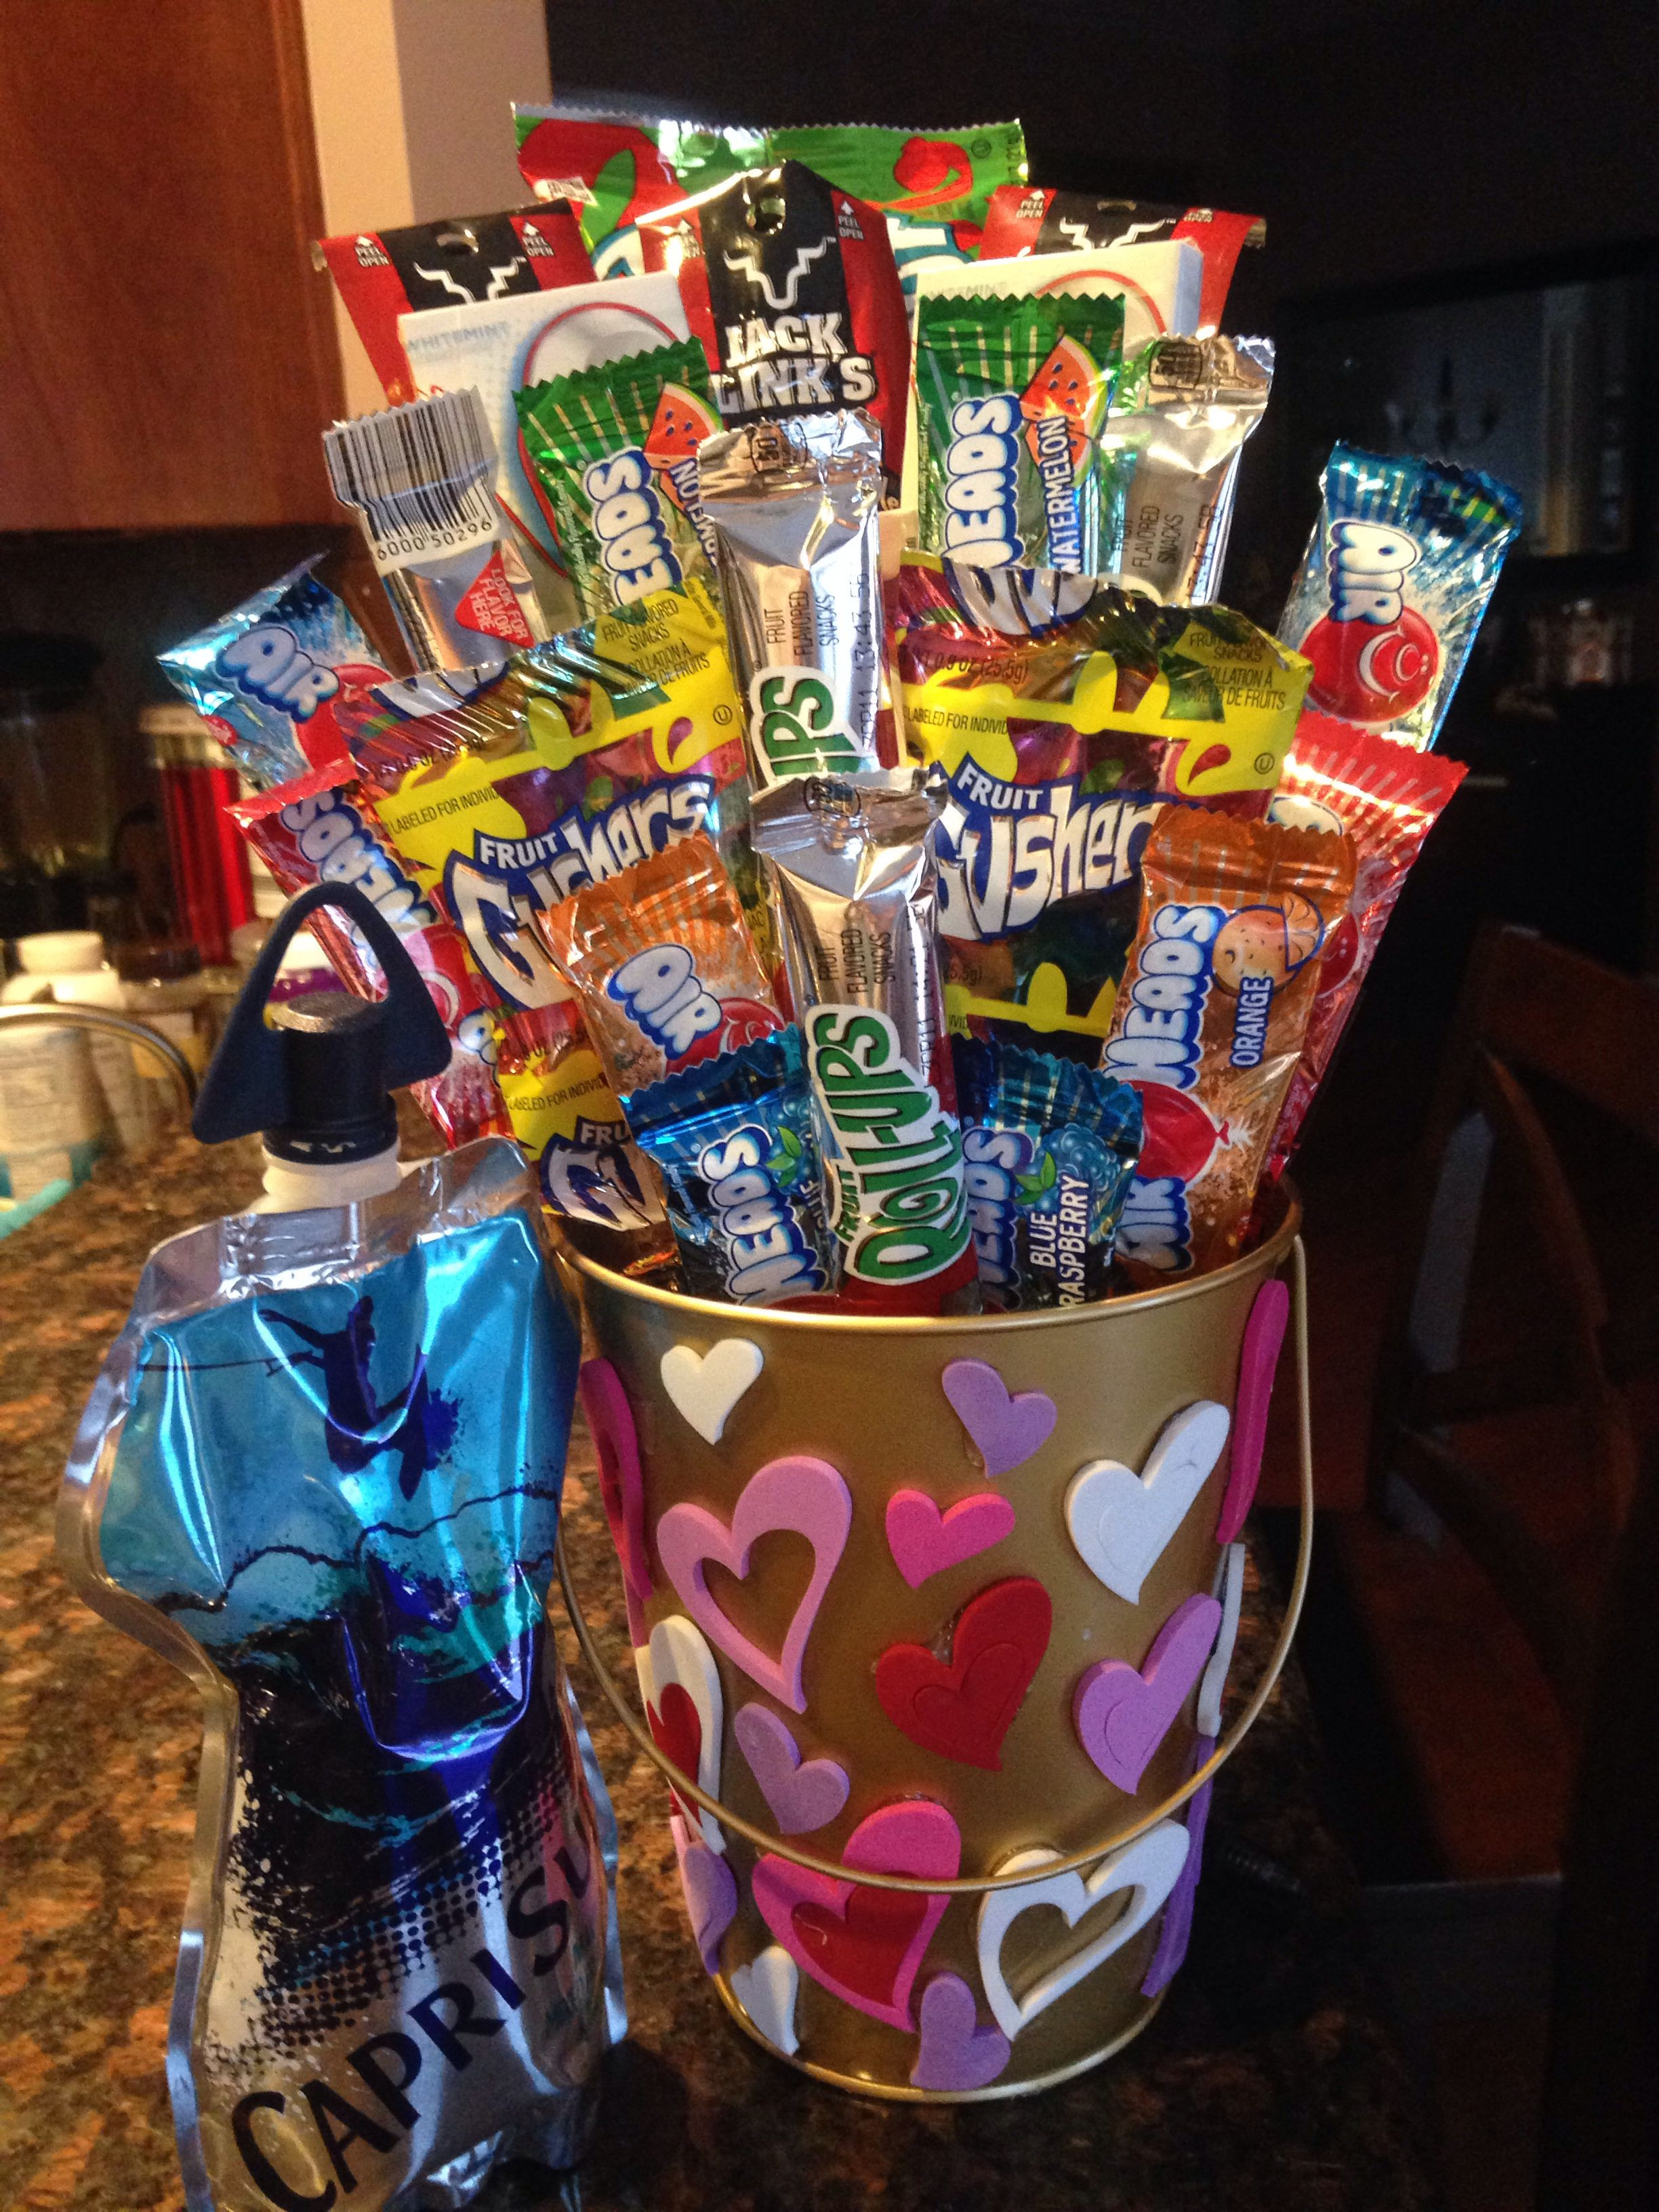 Candy Gift Basket Ideas
 My boyfriends candy basket for valentines day ️